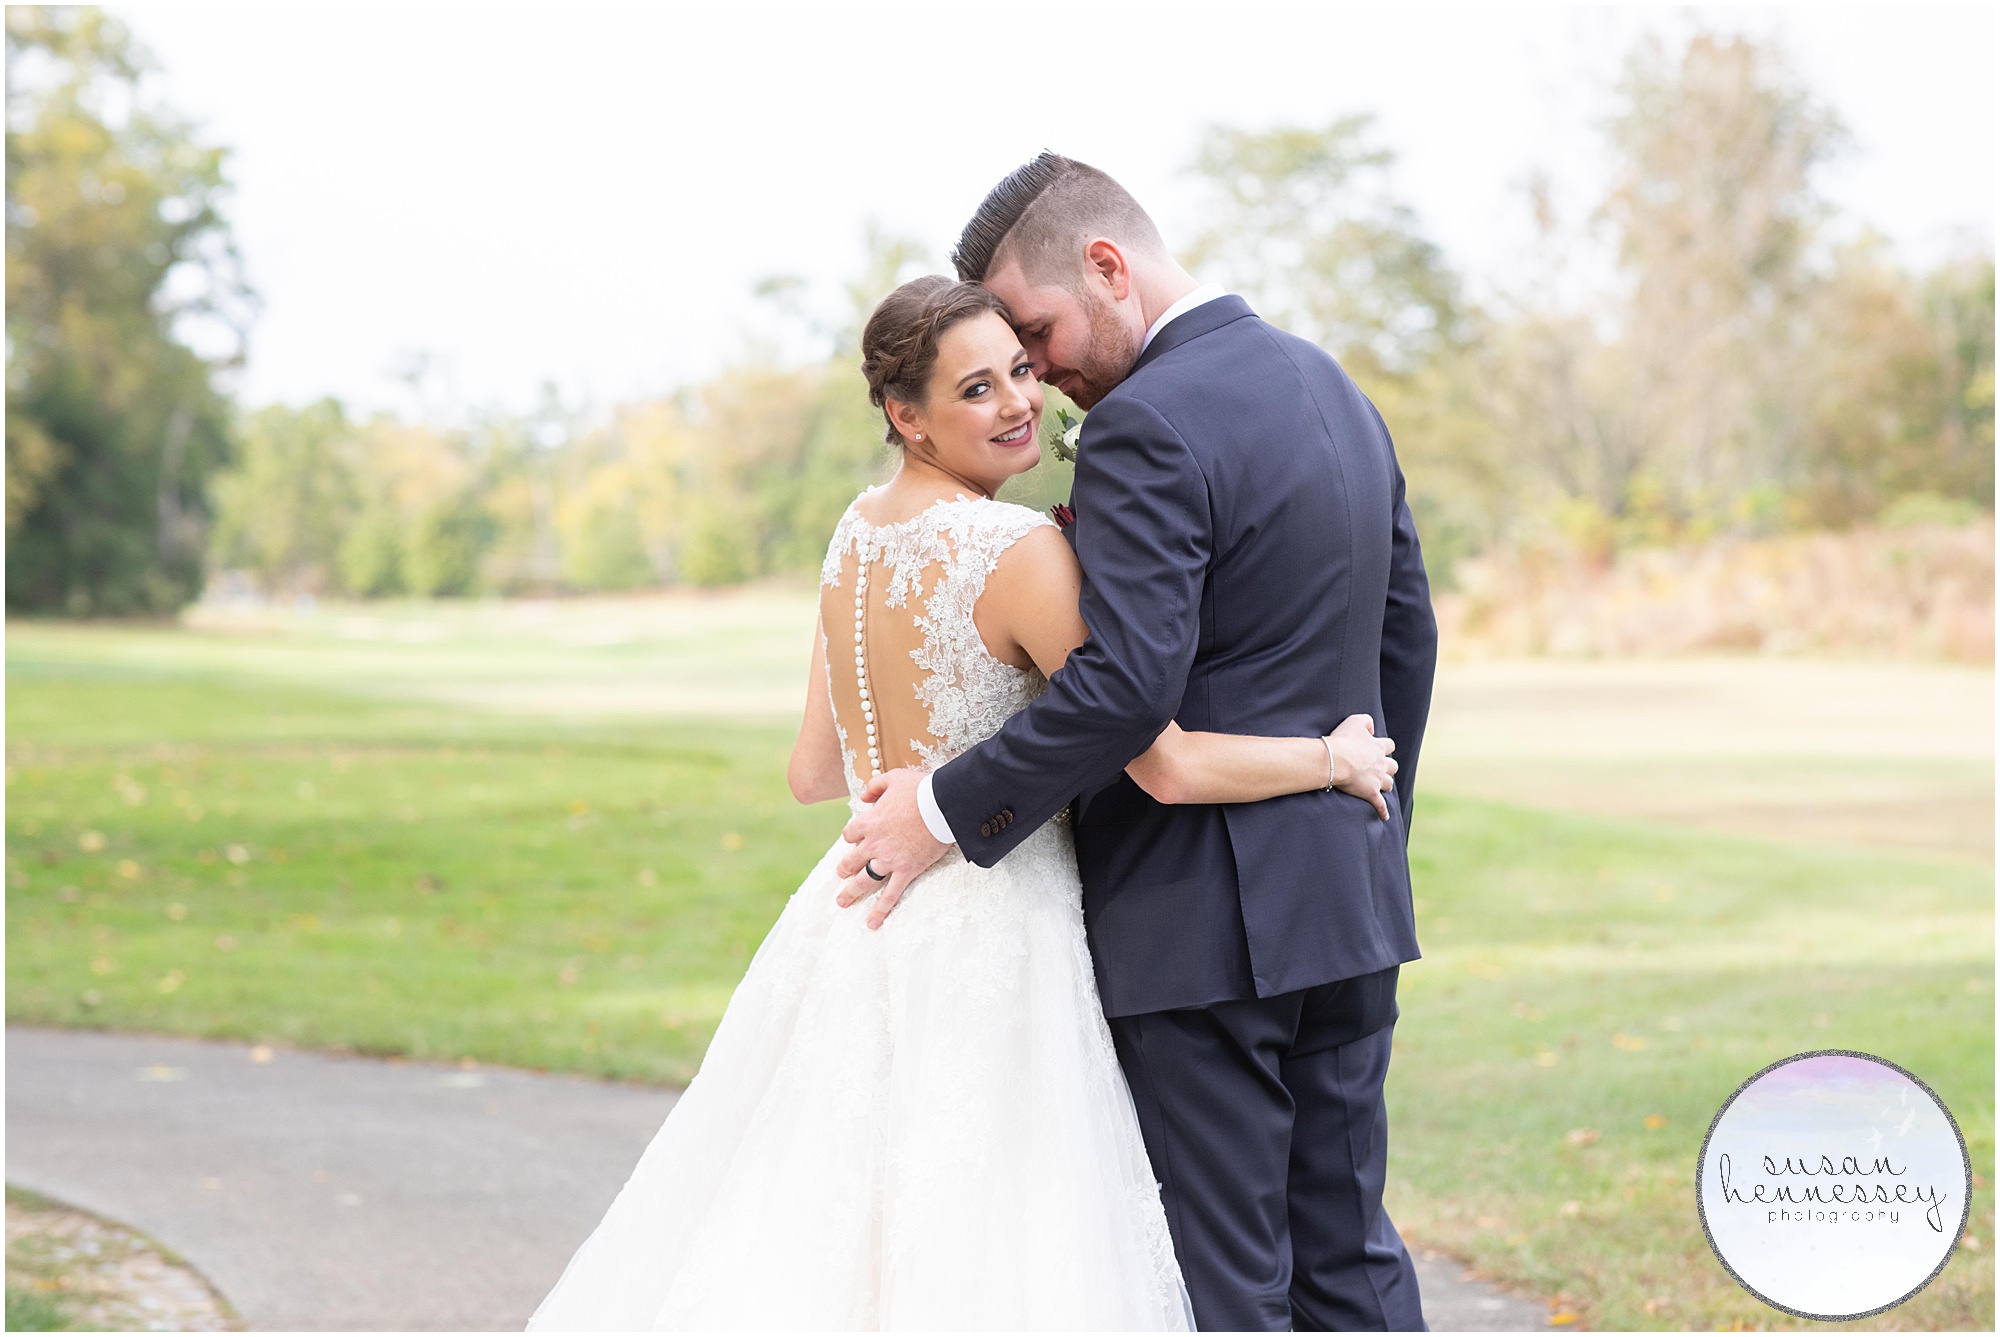 Outdoor fall wedding at Old York Country Club